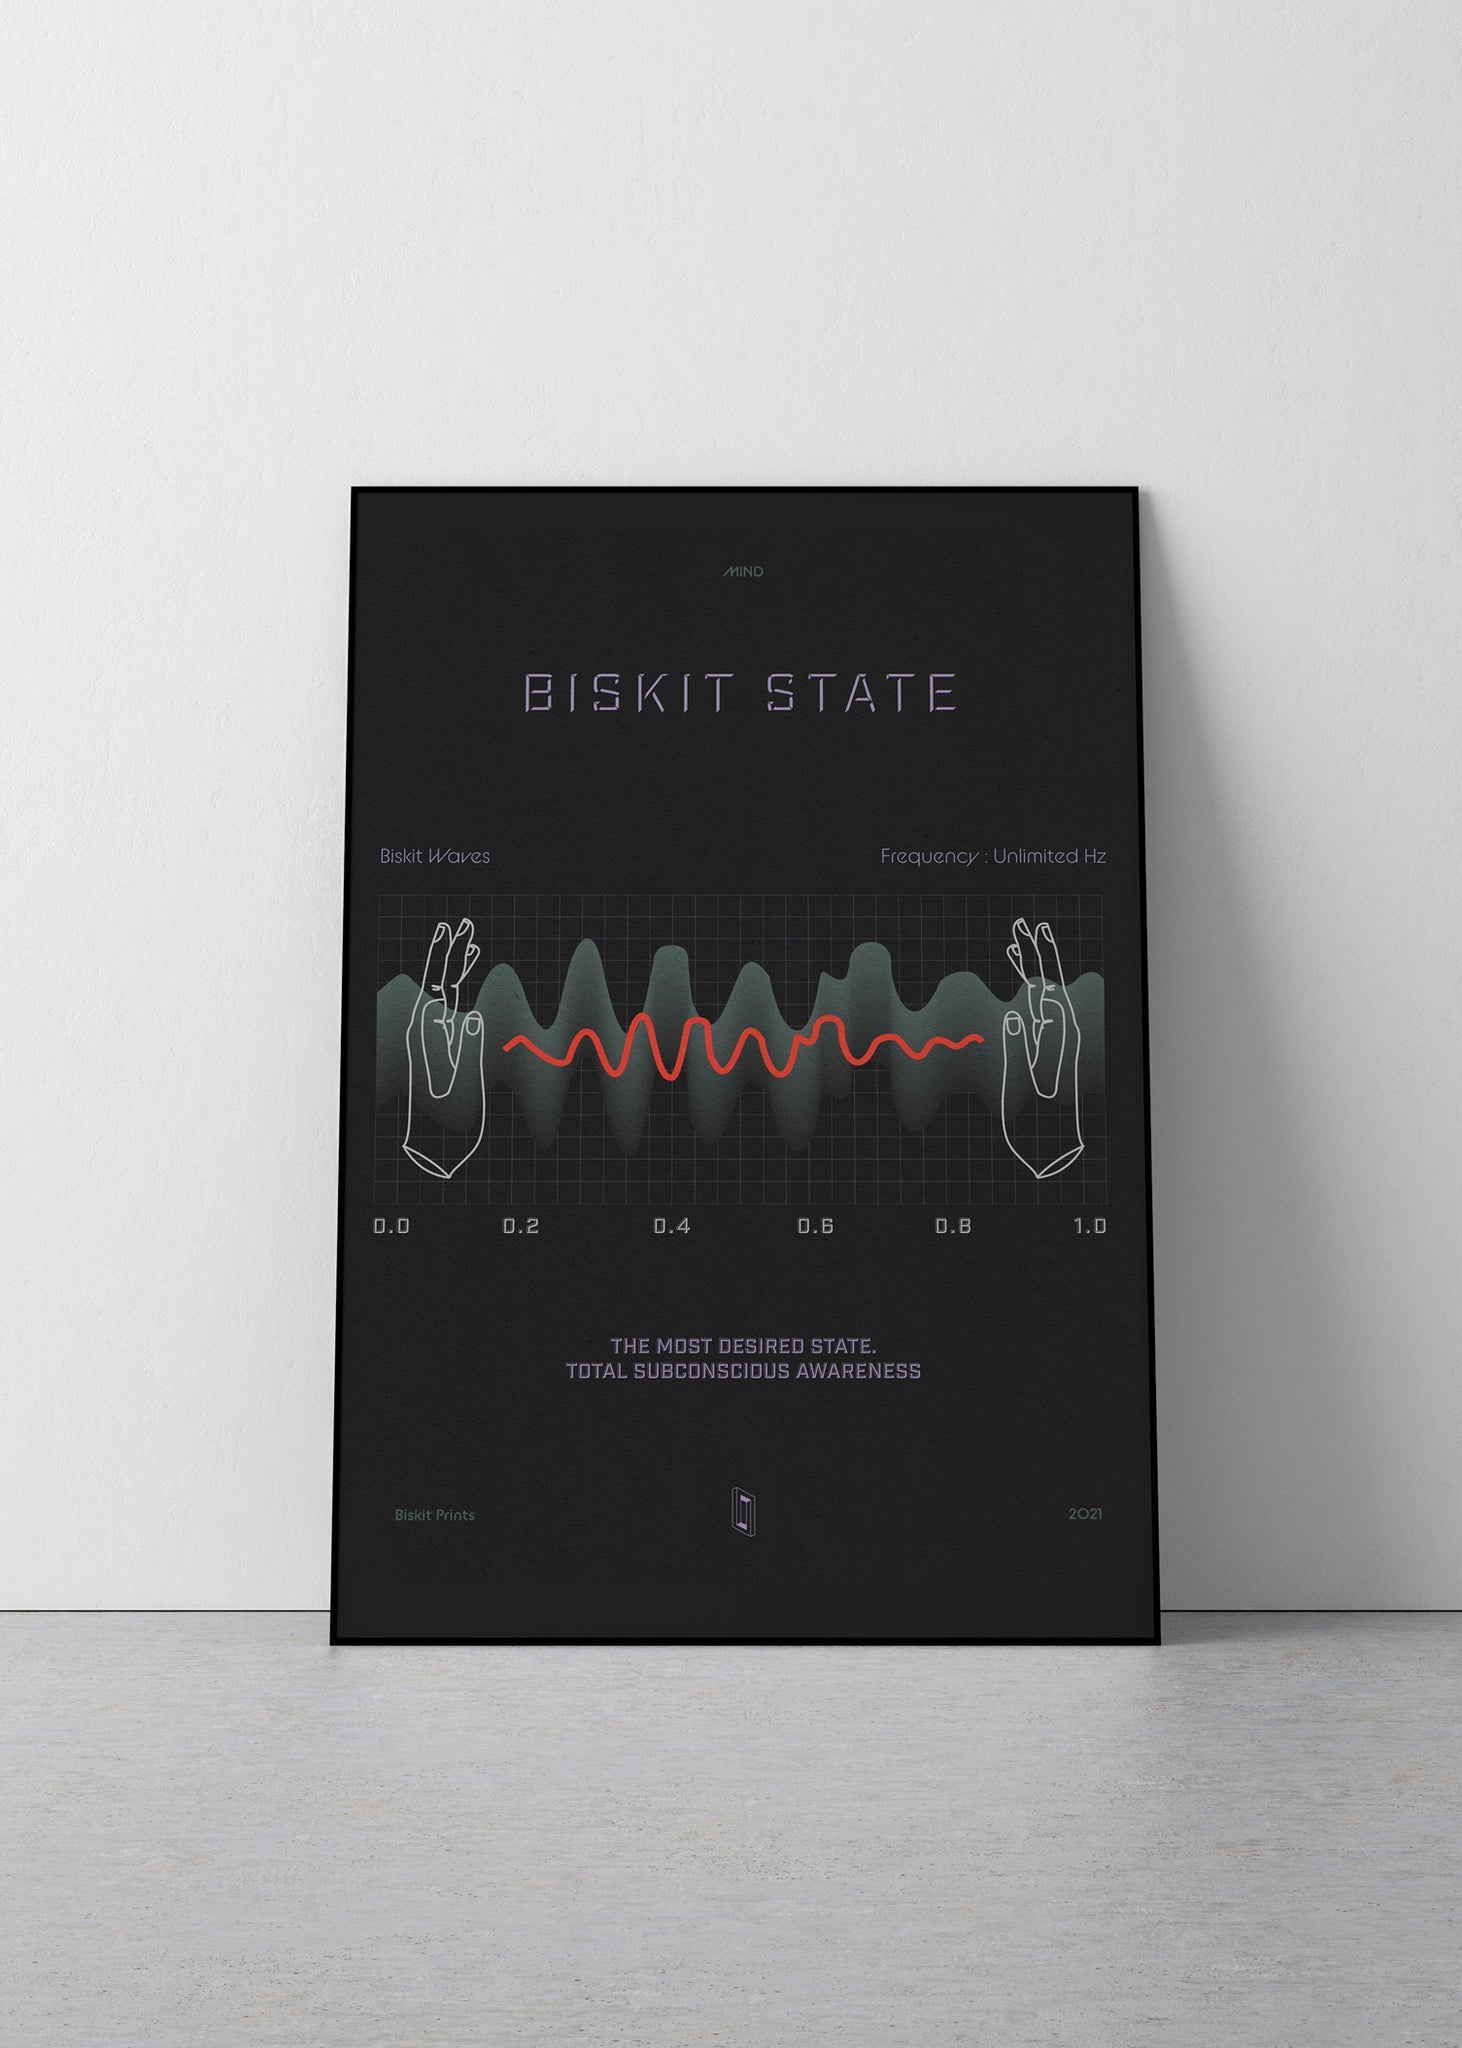 The posters depict the five main types of states – Awake, Peak, Dream, Deep-Sleep, and Meditative - plus a sixth state, arguably the most desired state, the BISKIT STATE.  